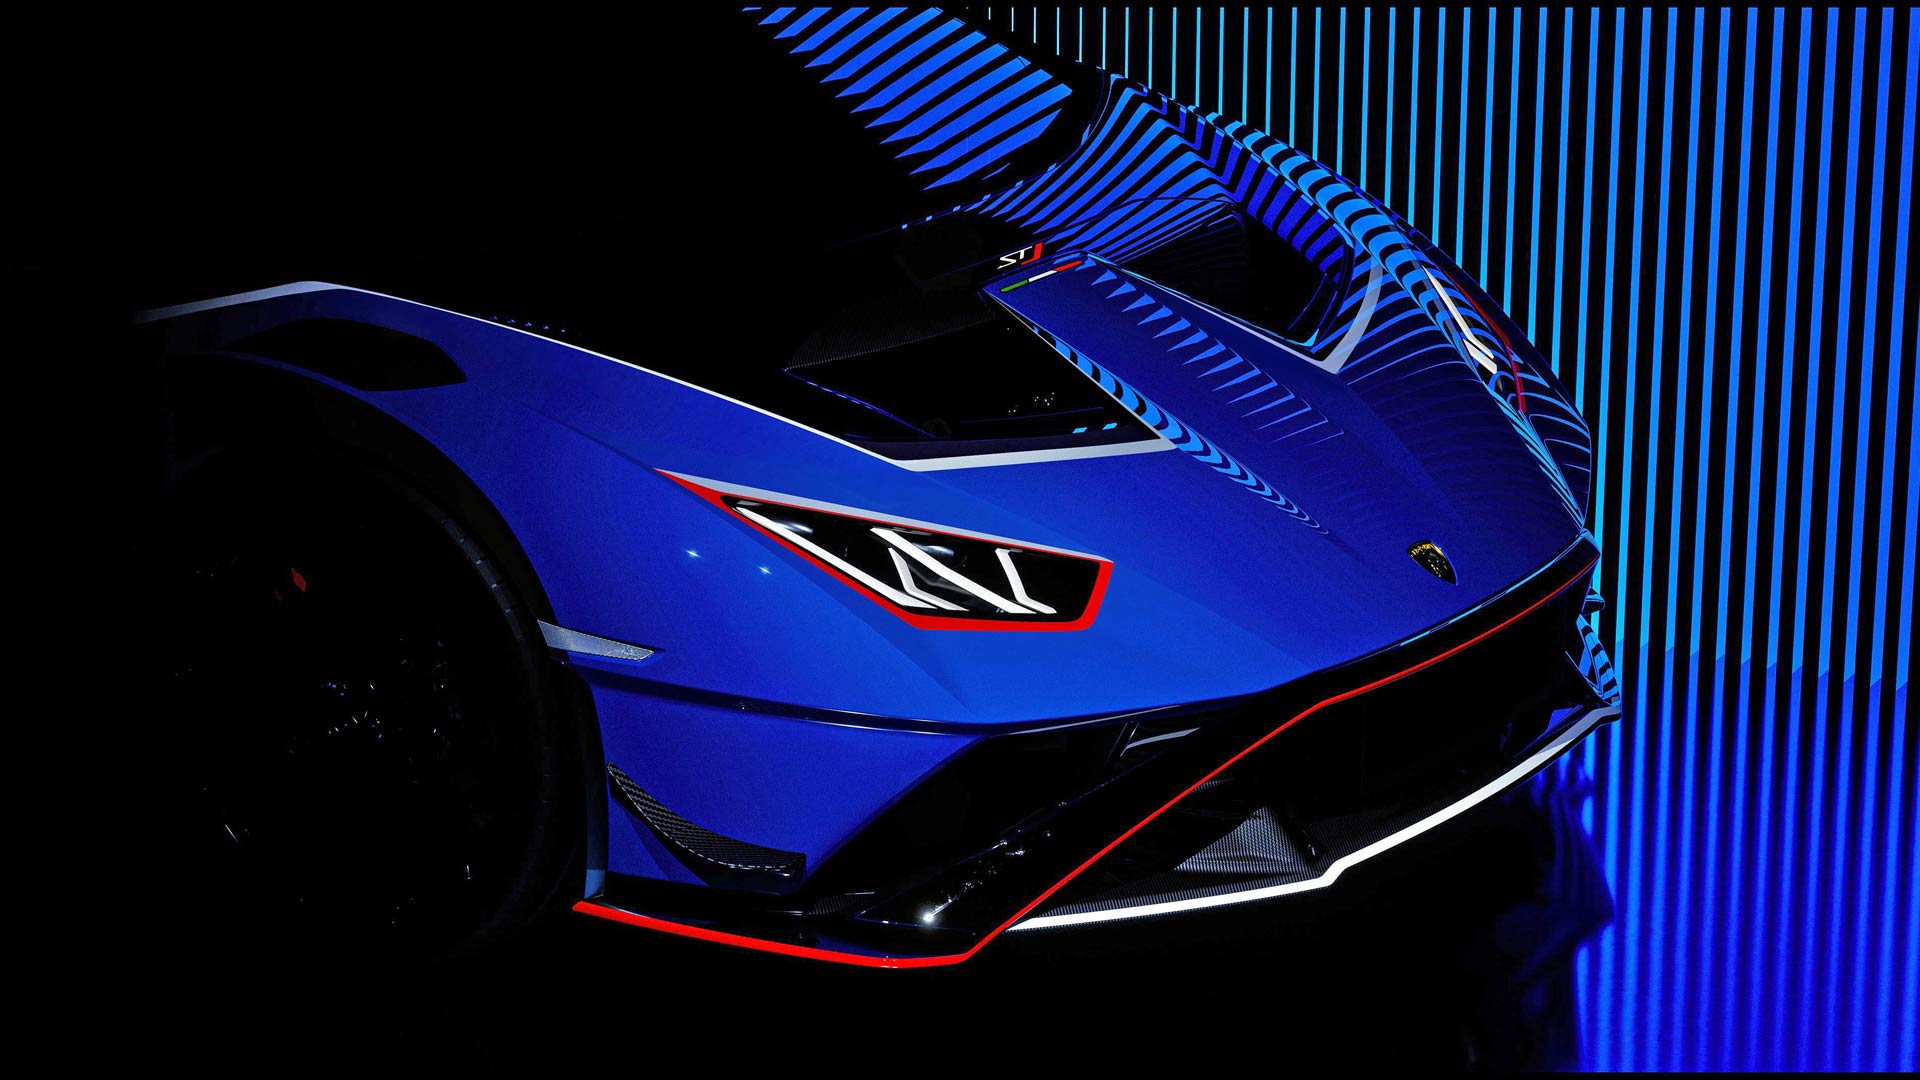 Last lap: Lamborghini Huracan bows out with STJ special edition